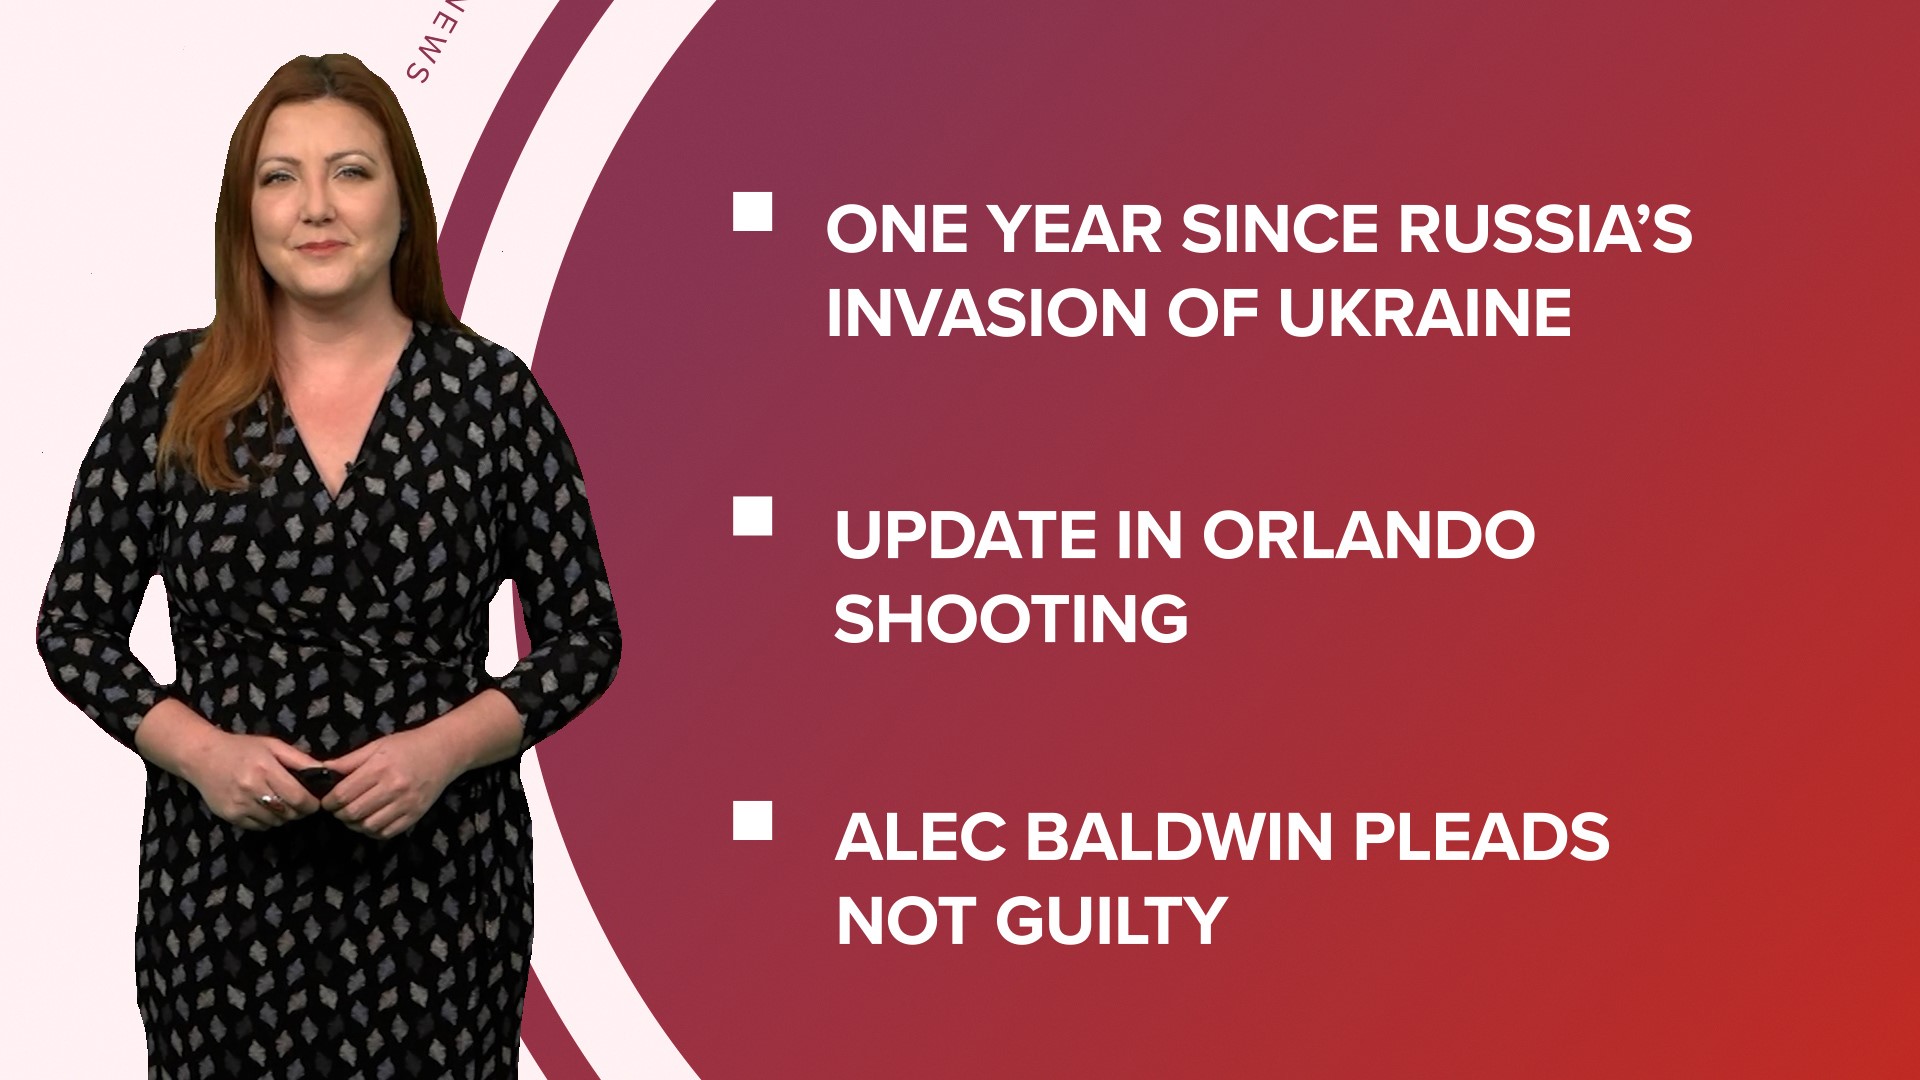 A look at what is happening in the news from marking one year since Russia invaded Ukraine to Alec Baldwin pleading not guilty and NTSB report on train derailment.